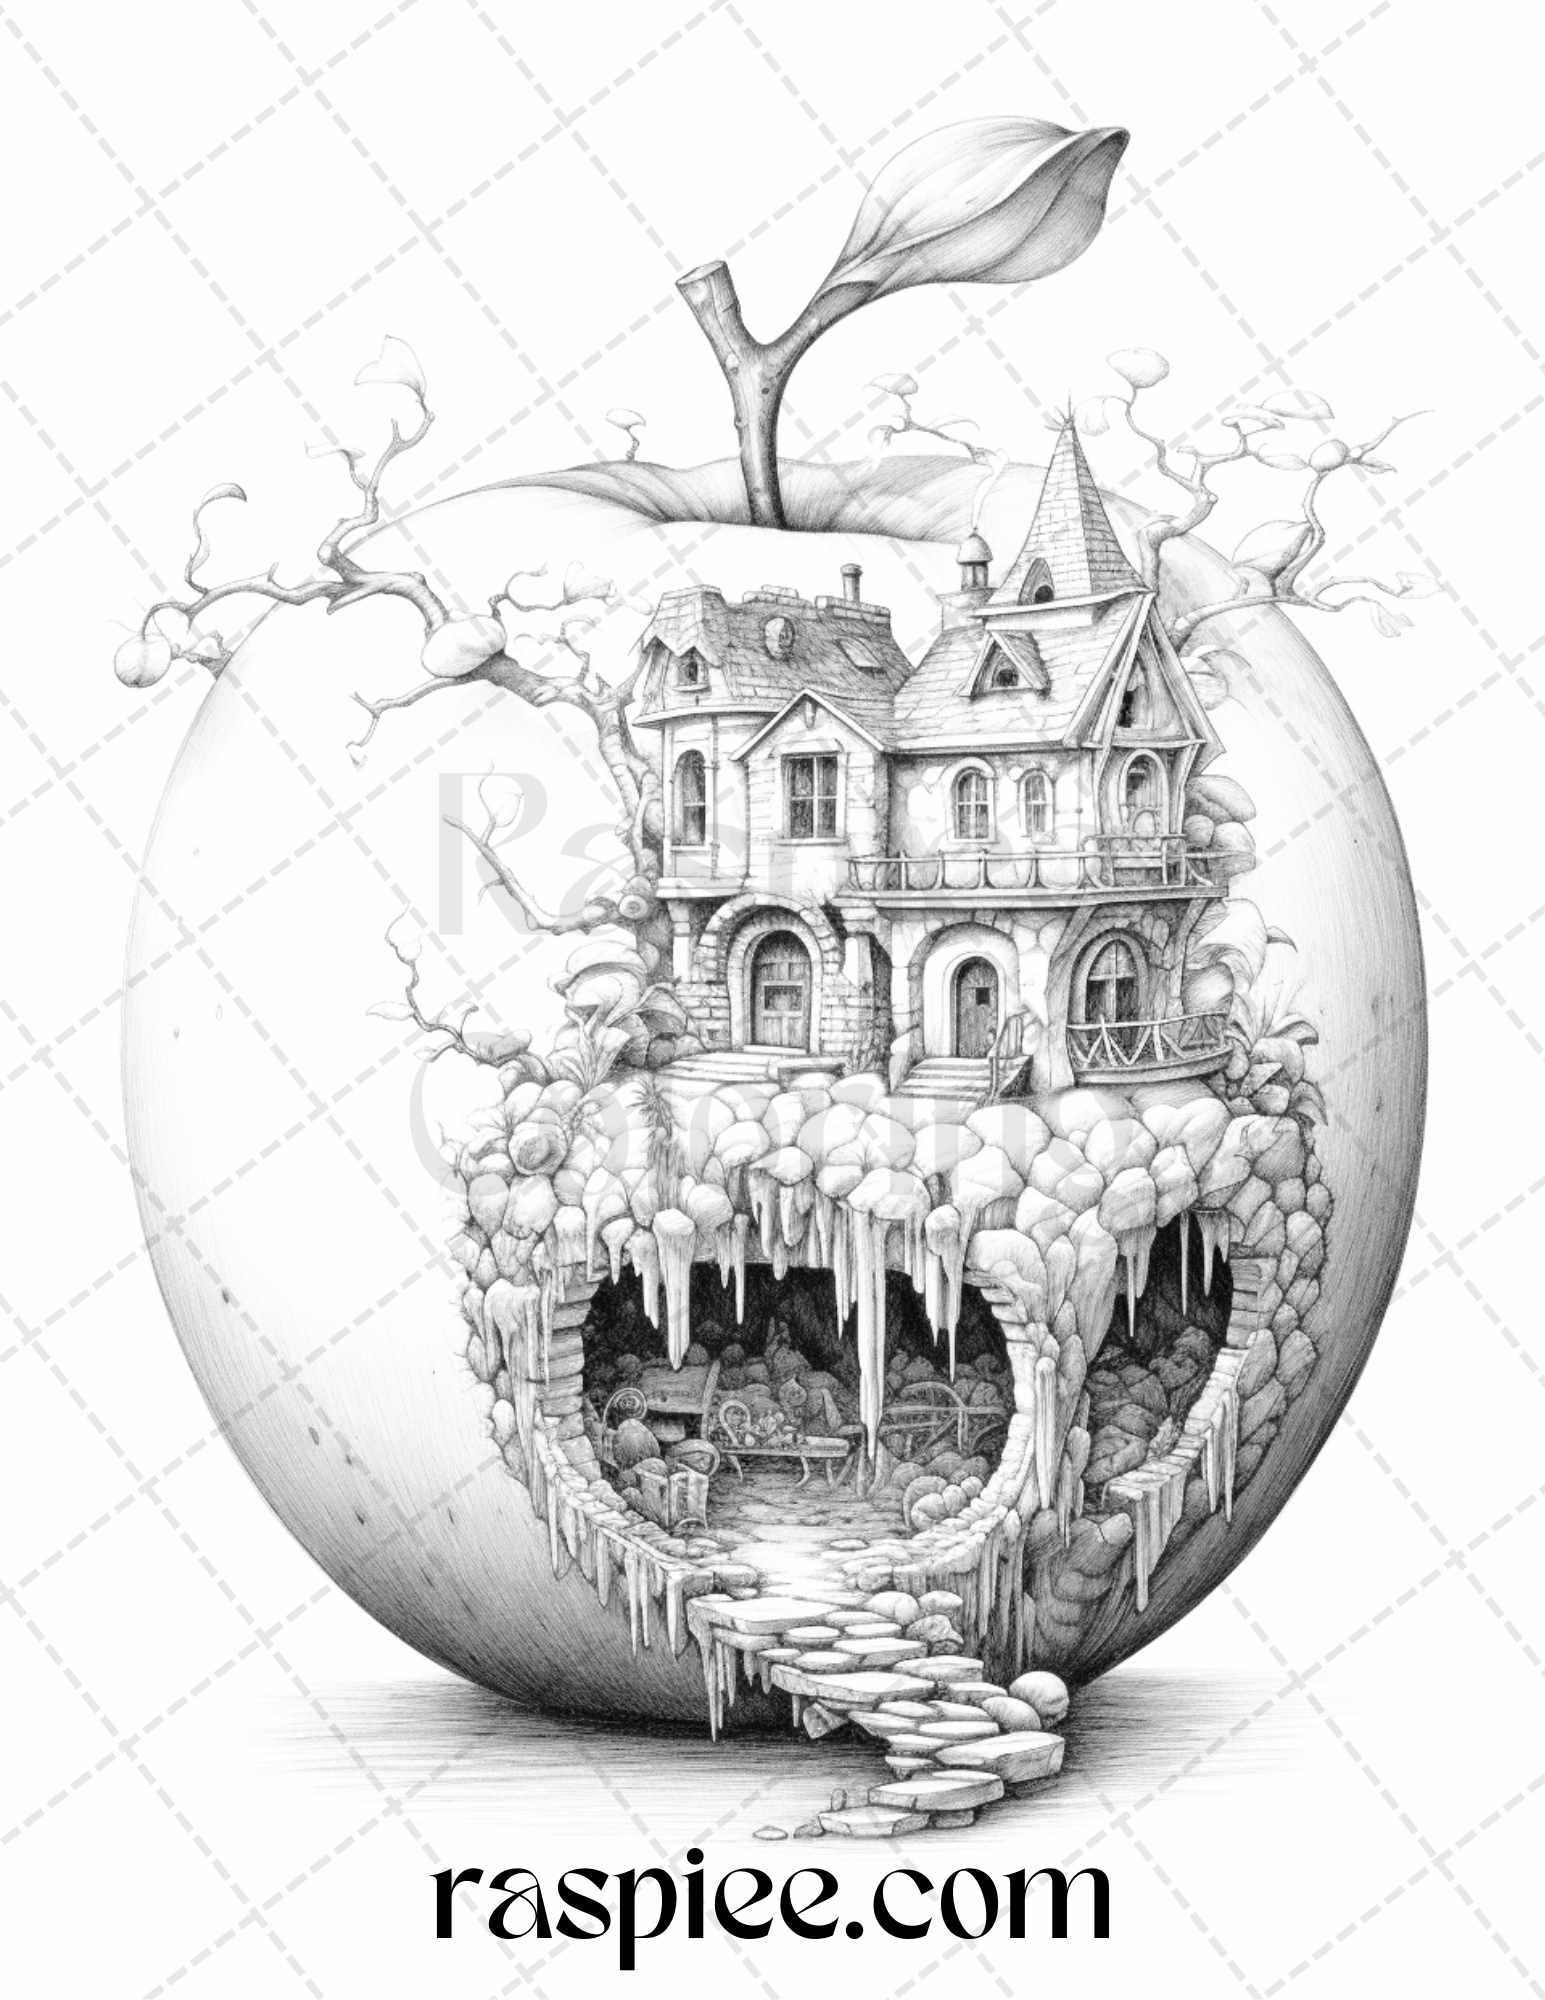 Apple Grayscale Coloring Page, Detailed Apple Coloring Sheet, Relaxing Adult Coloring Page, Stress Relieving Coloring PDF, Miniworld Landscape Coloring, Adult Coloring Stress Relief, Relaxation Coloring Activity